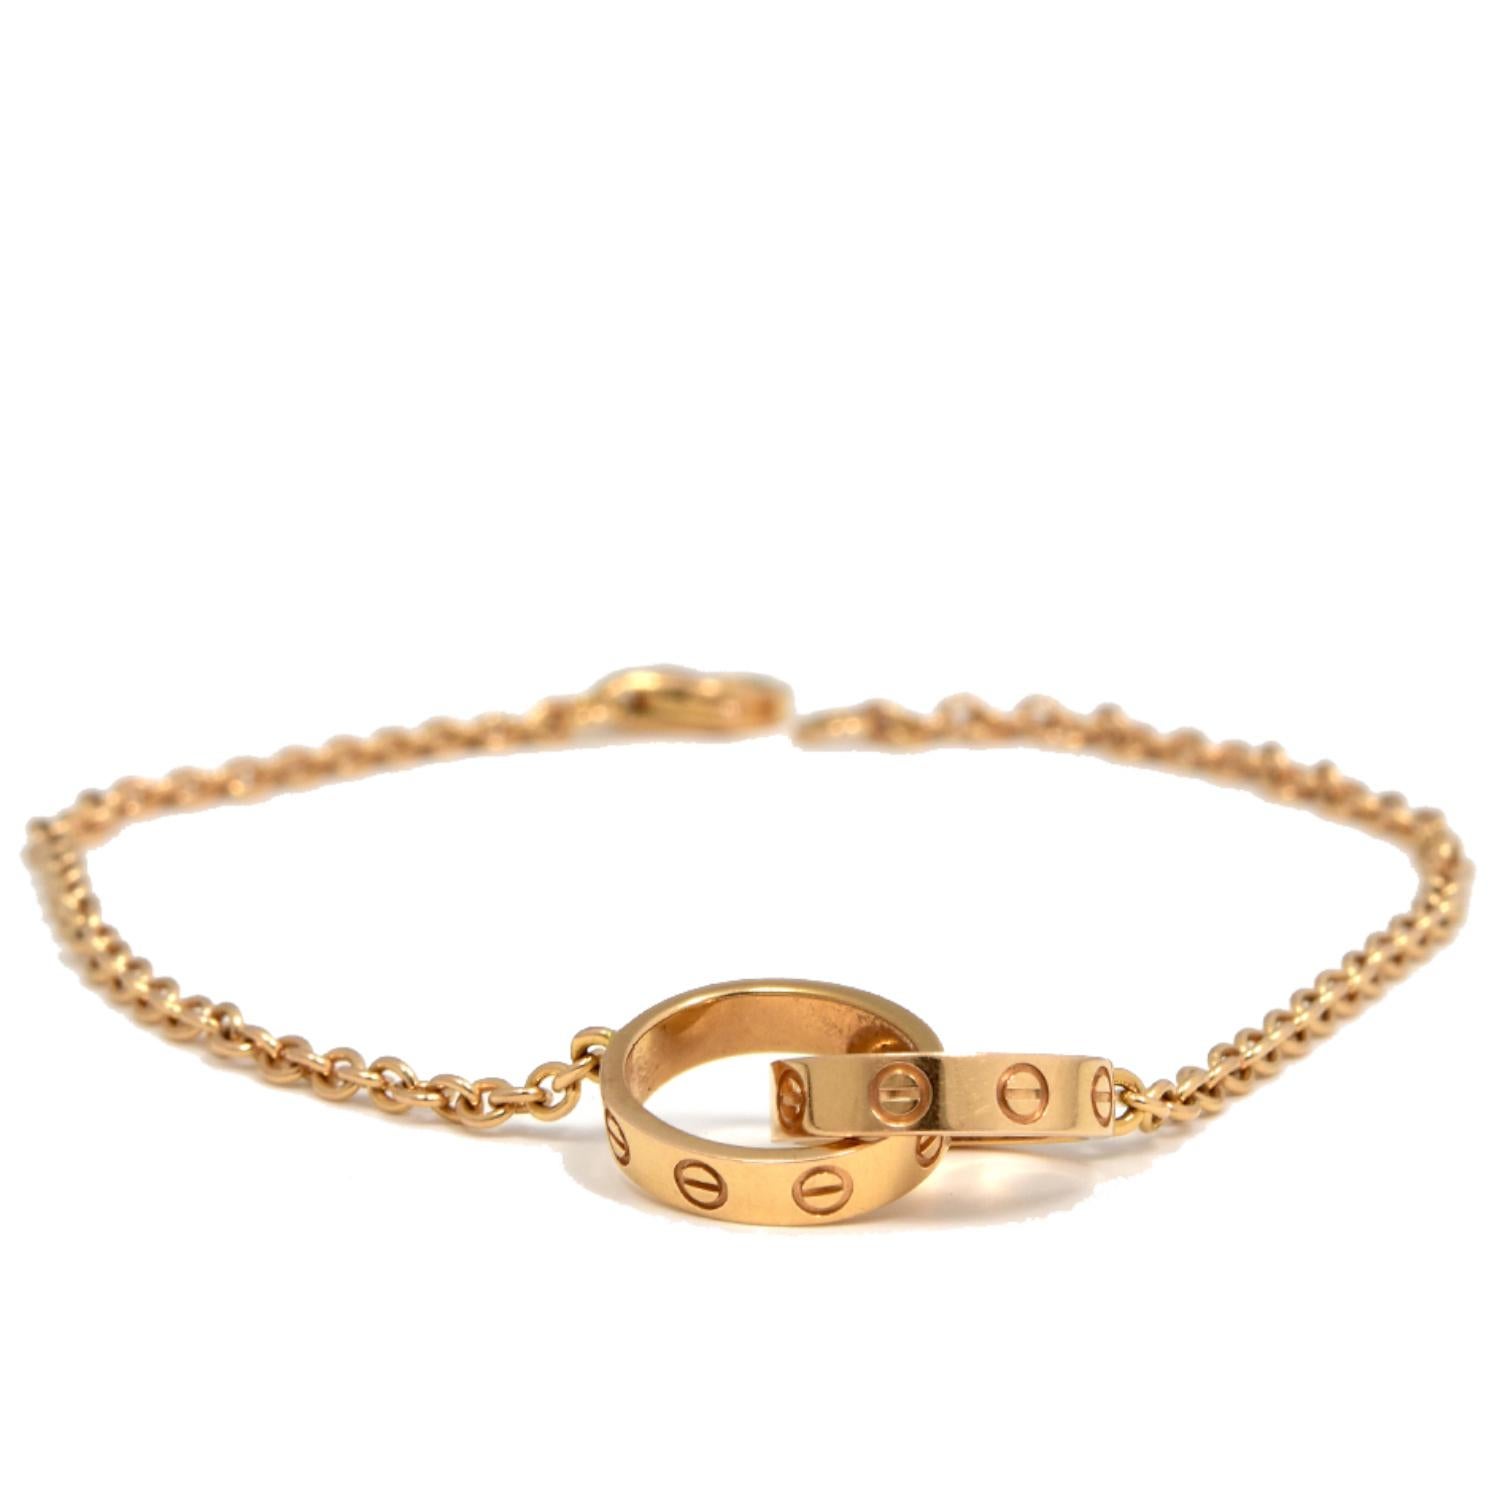 Designer: Cartier

Collection: LOVE

Style: Chain  Bracelet

Metal: Rose Gold  

Metal Purity: 18k

Total Item  Weight (Carat): 

Size: 17. 2 cm

Hallmarks: Cartier; Serial #; 

Includes:  24 Months Brilliance Jewels Warranty

                      